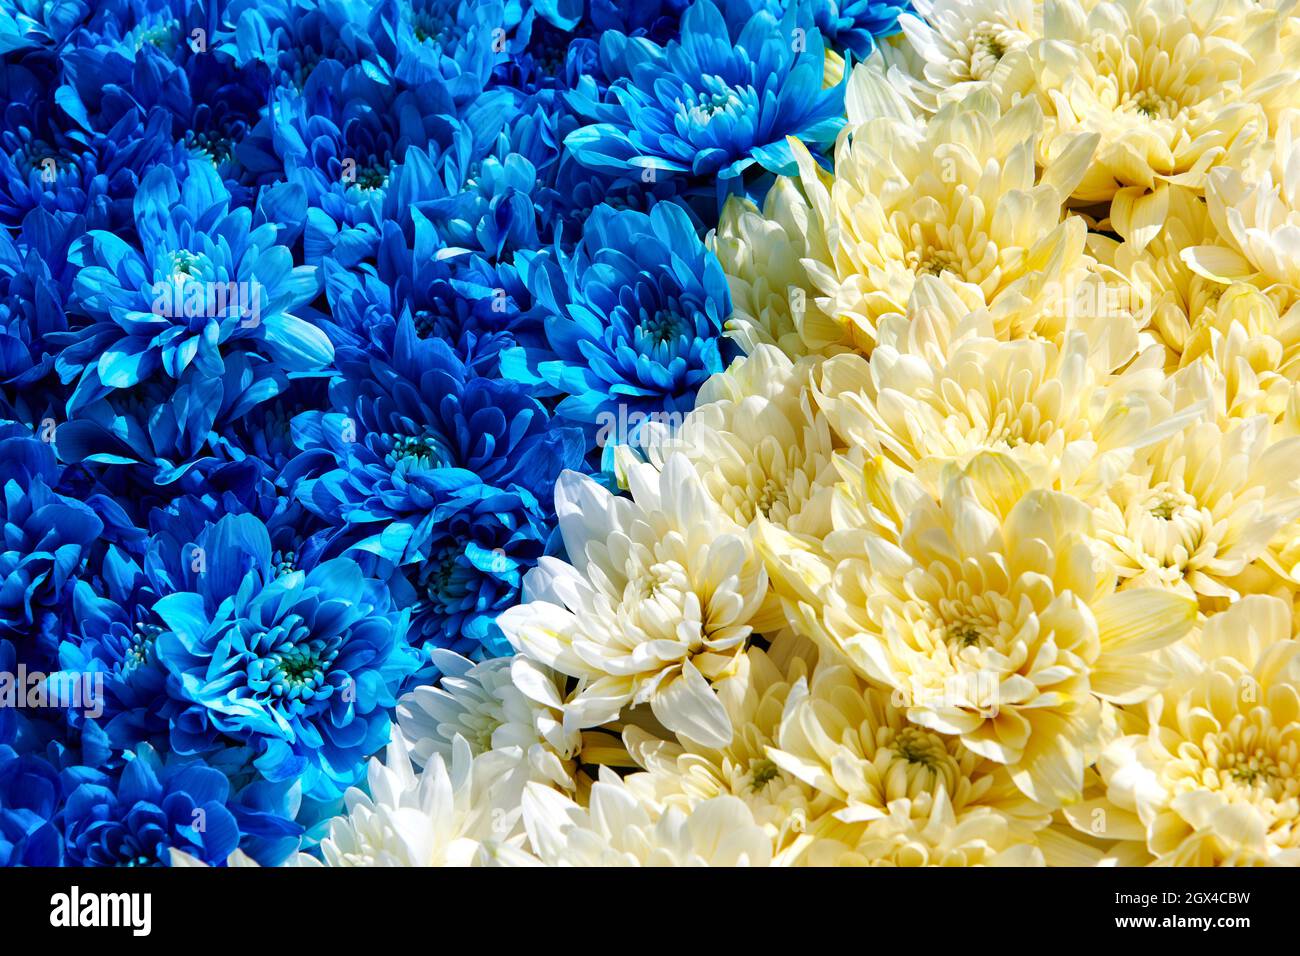 Blue and yellow chrysanthemums background. Huge flowers bouquet ...